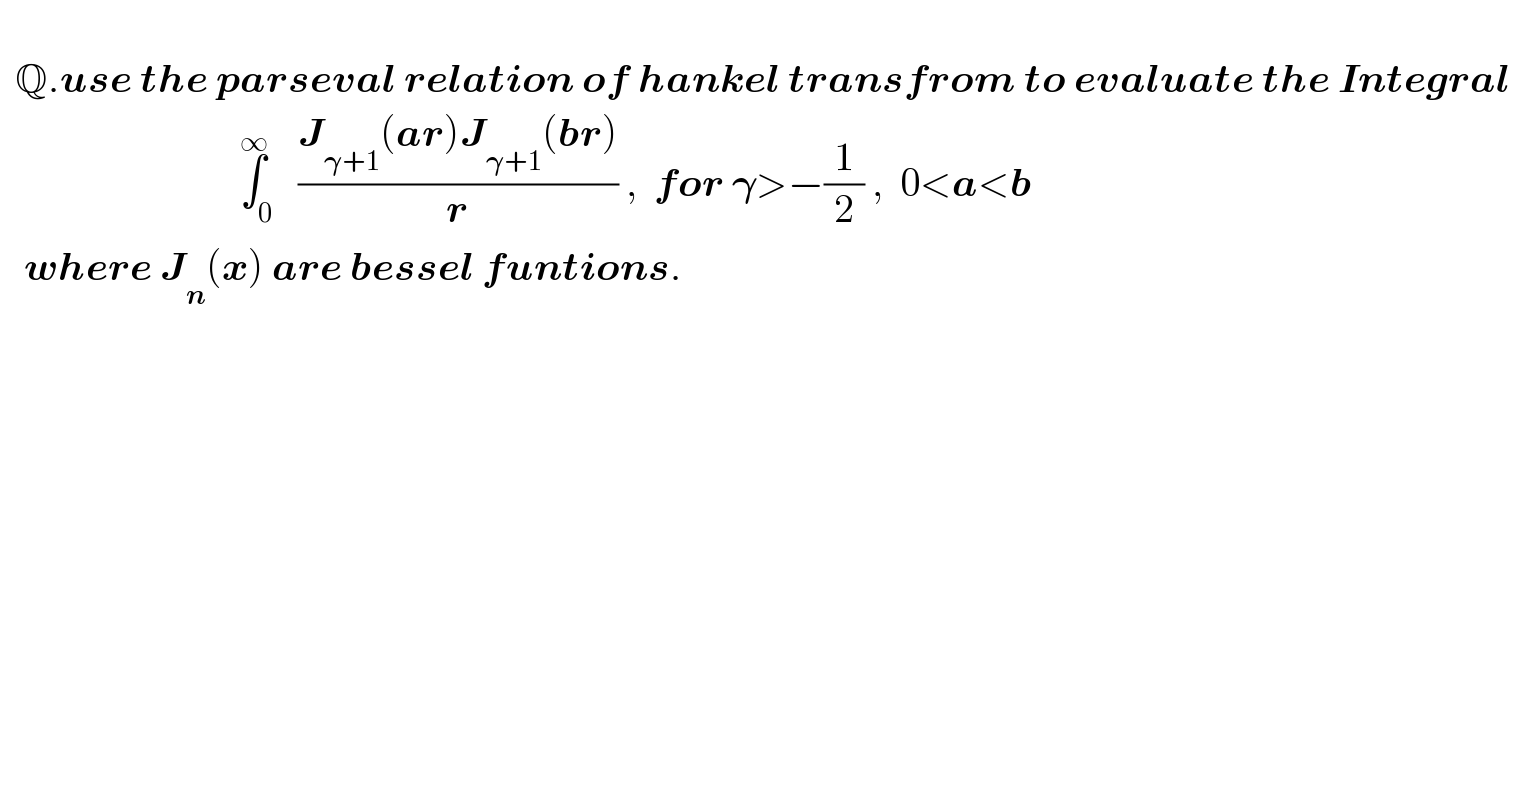     Q.use the parseval relation of hankel transfrom to evaluate the Integral                                  ∫_0 ^∞   ((J_(𝛄+1) (ar)J_(𝛄+1) (br))/r) ,  for 𝛄>−(1/2) ,  0<a<b     where J_n (x) are bessel funtions.    